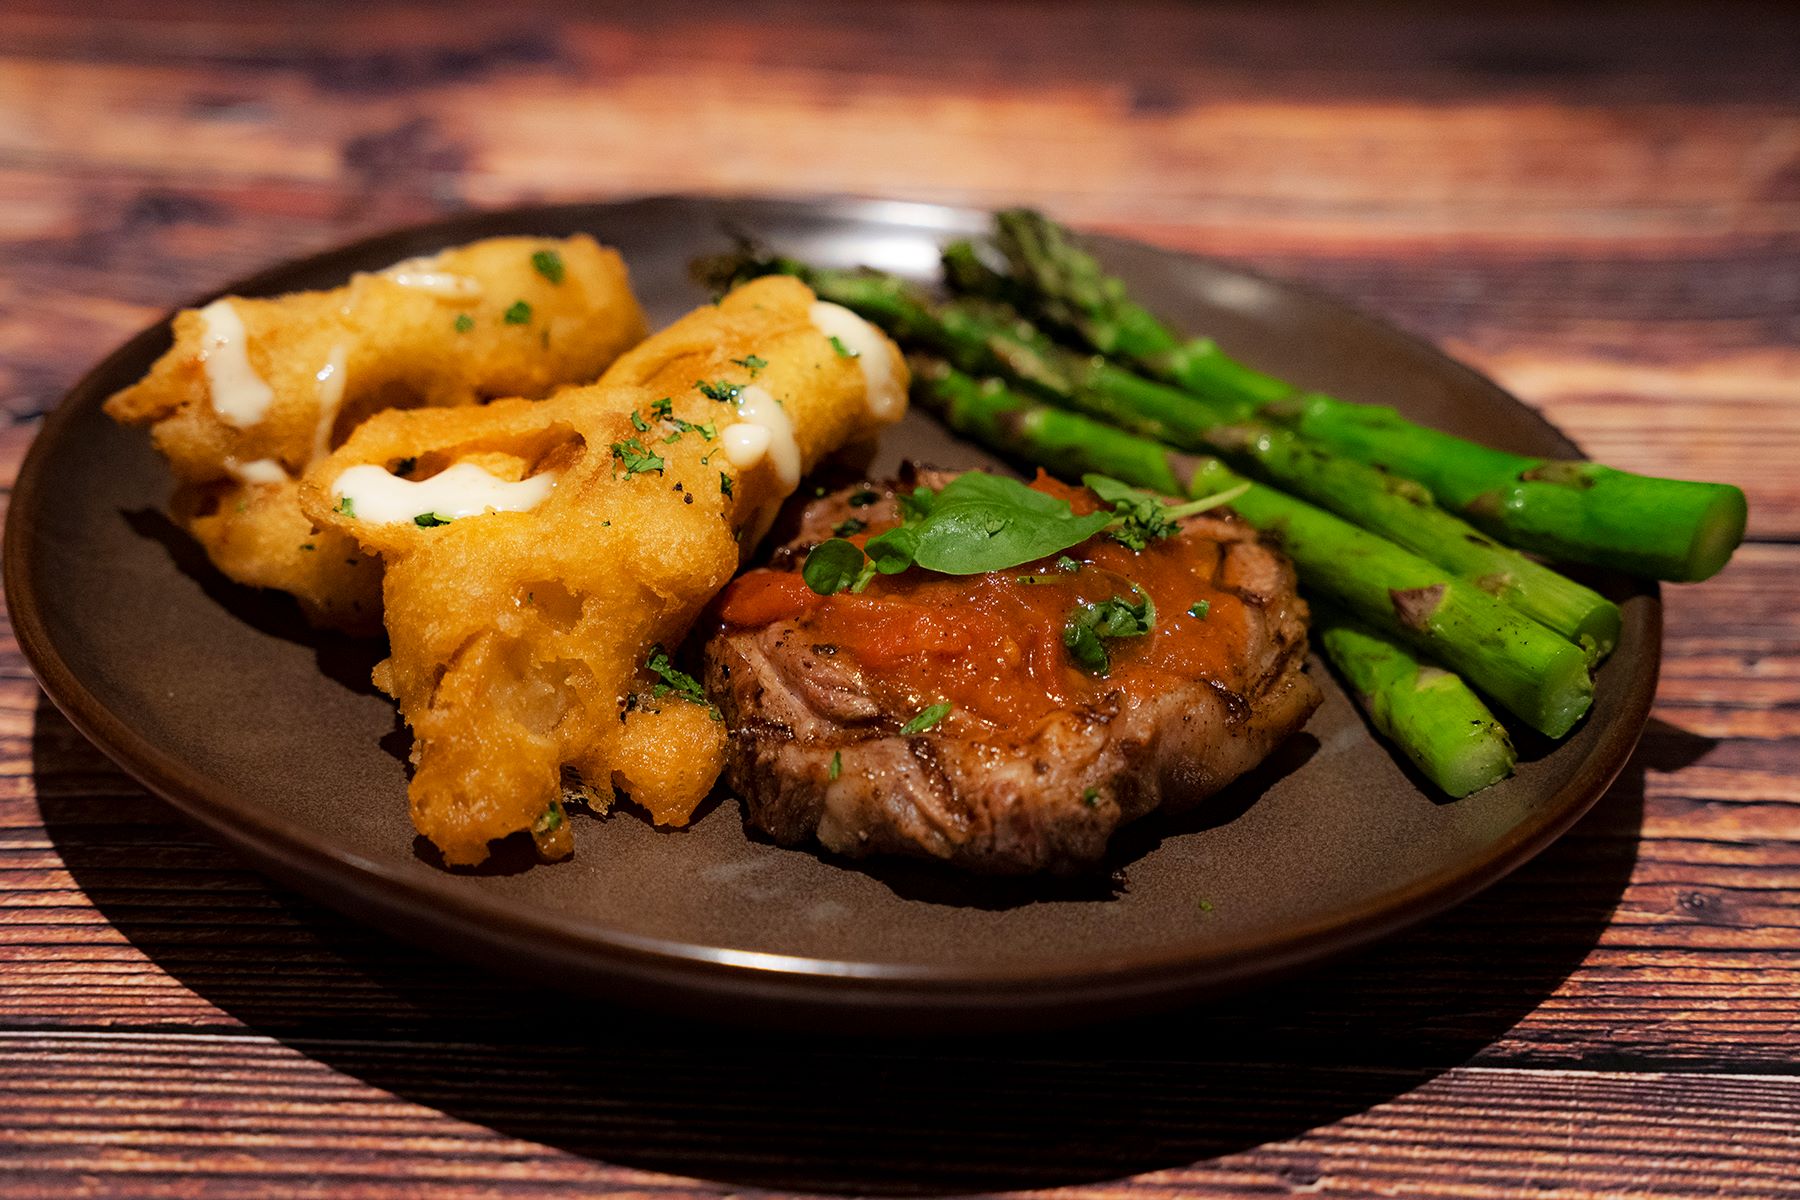 An image of Black Angus' Samuel Adams Summer Ale New York Strip complete with beer-battered potato wedges and grilled asparagus